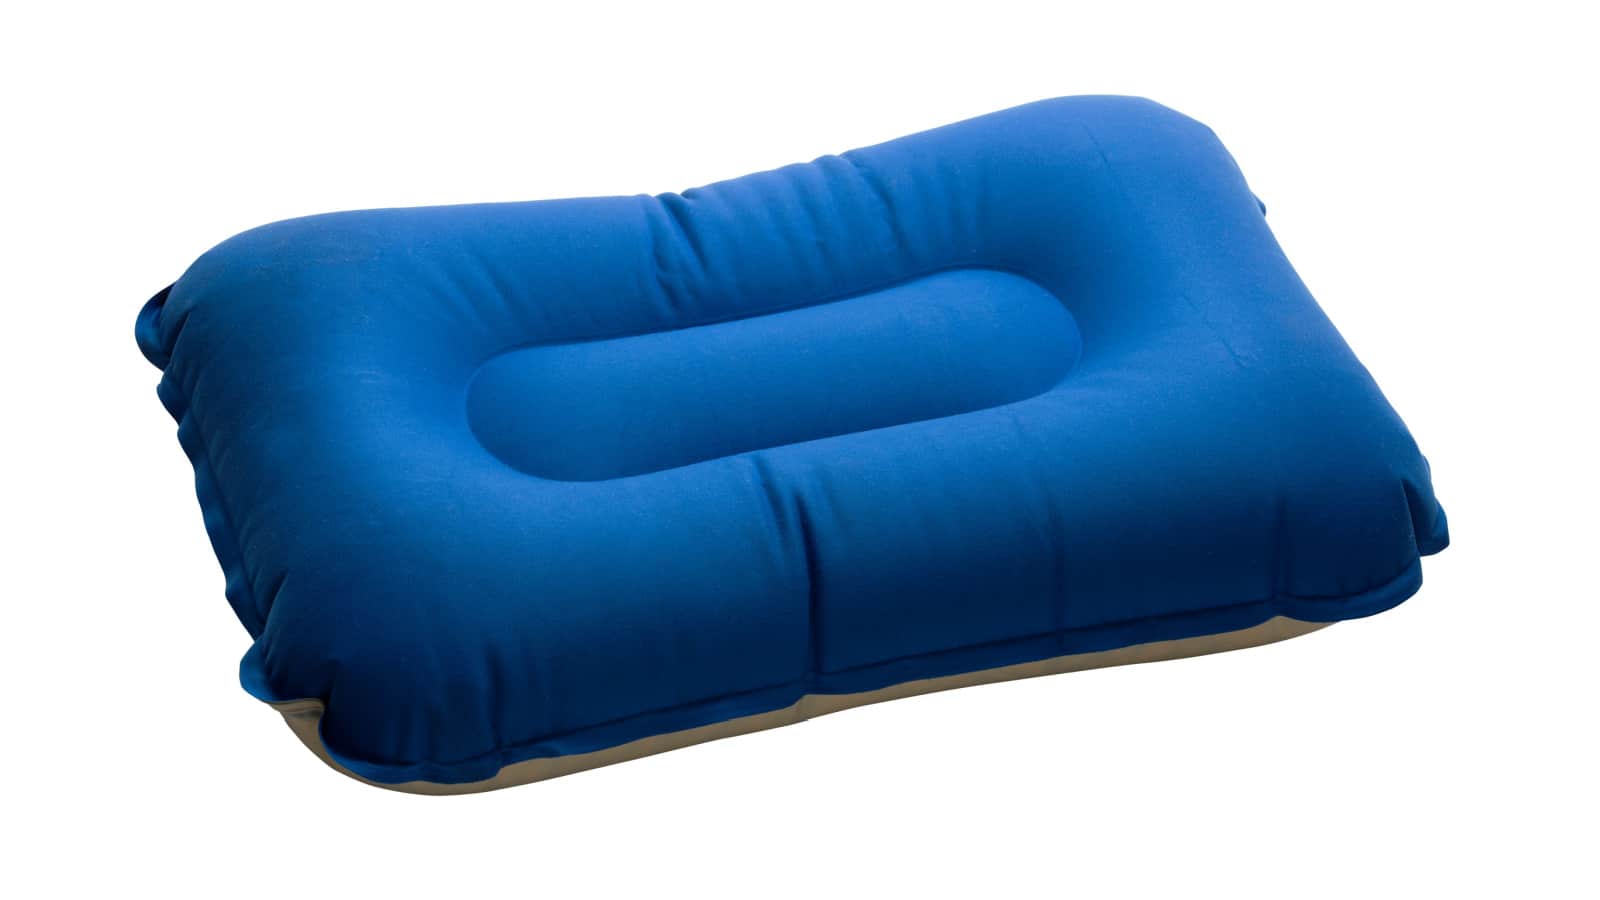 Blue inflatable camping pillow, clipping path